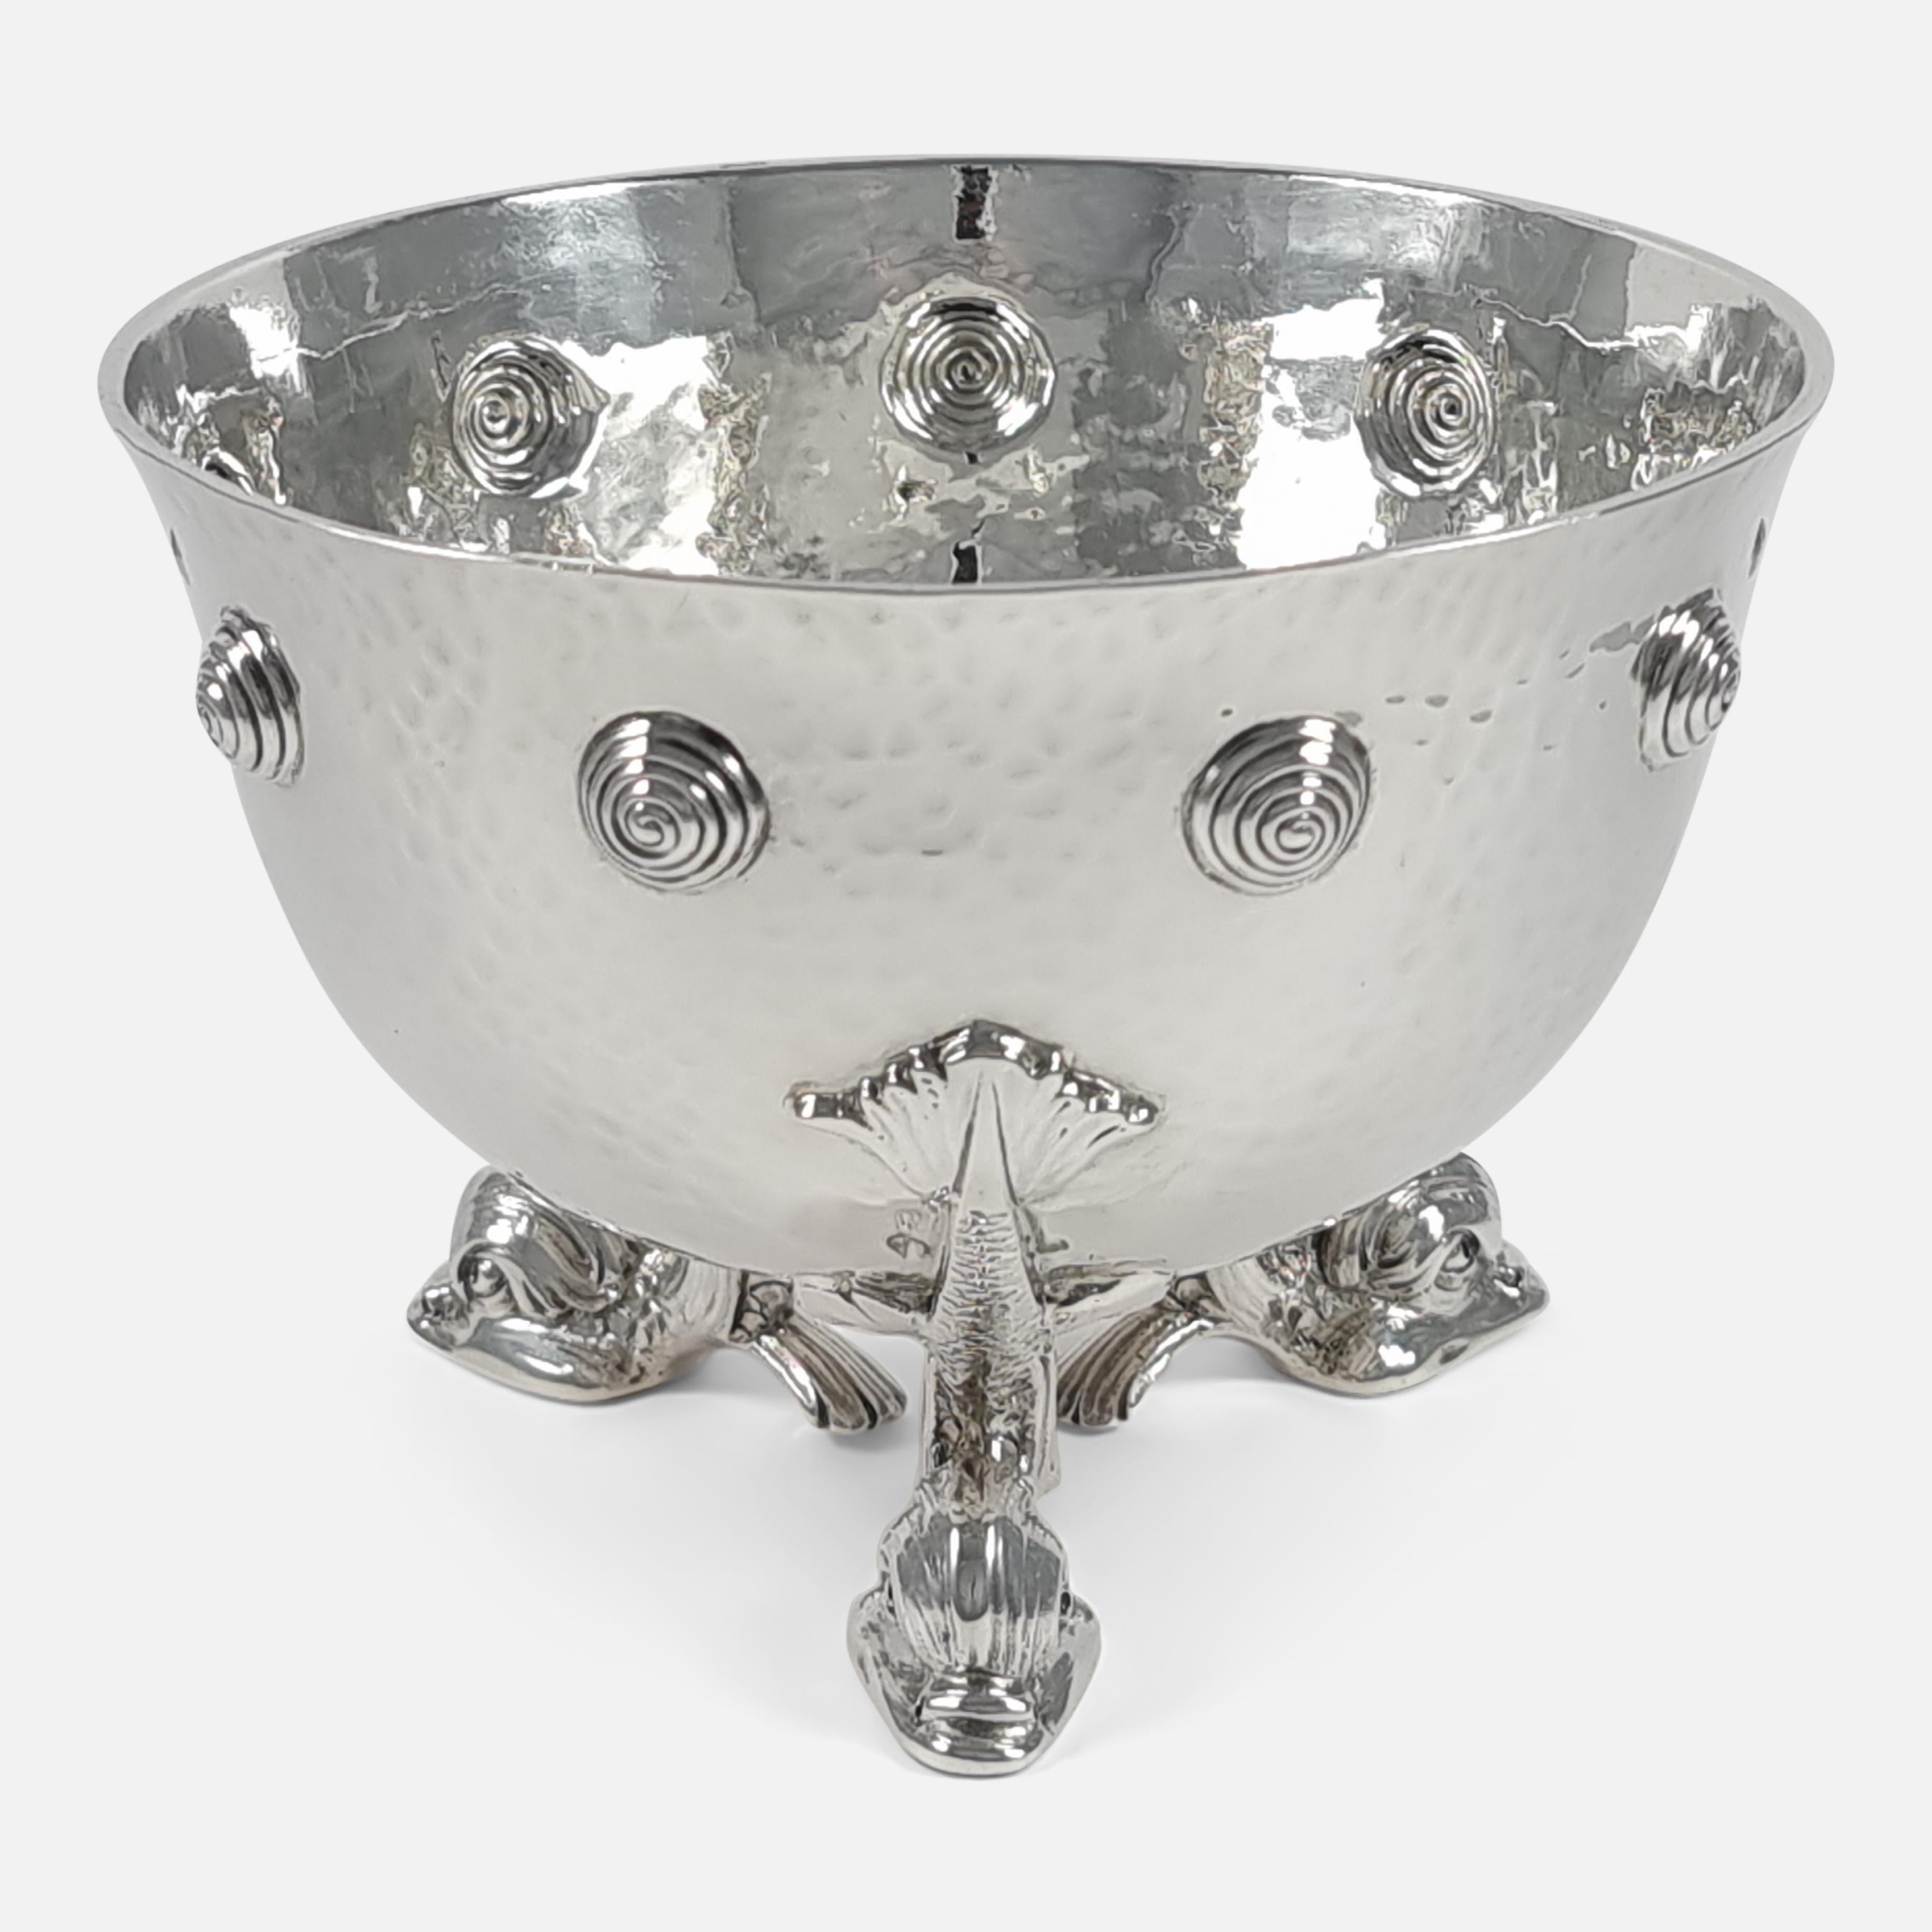 Arts and Crafts Edward VII Sterling Silver Bowl, Mappin & Webb, 1906